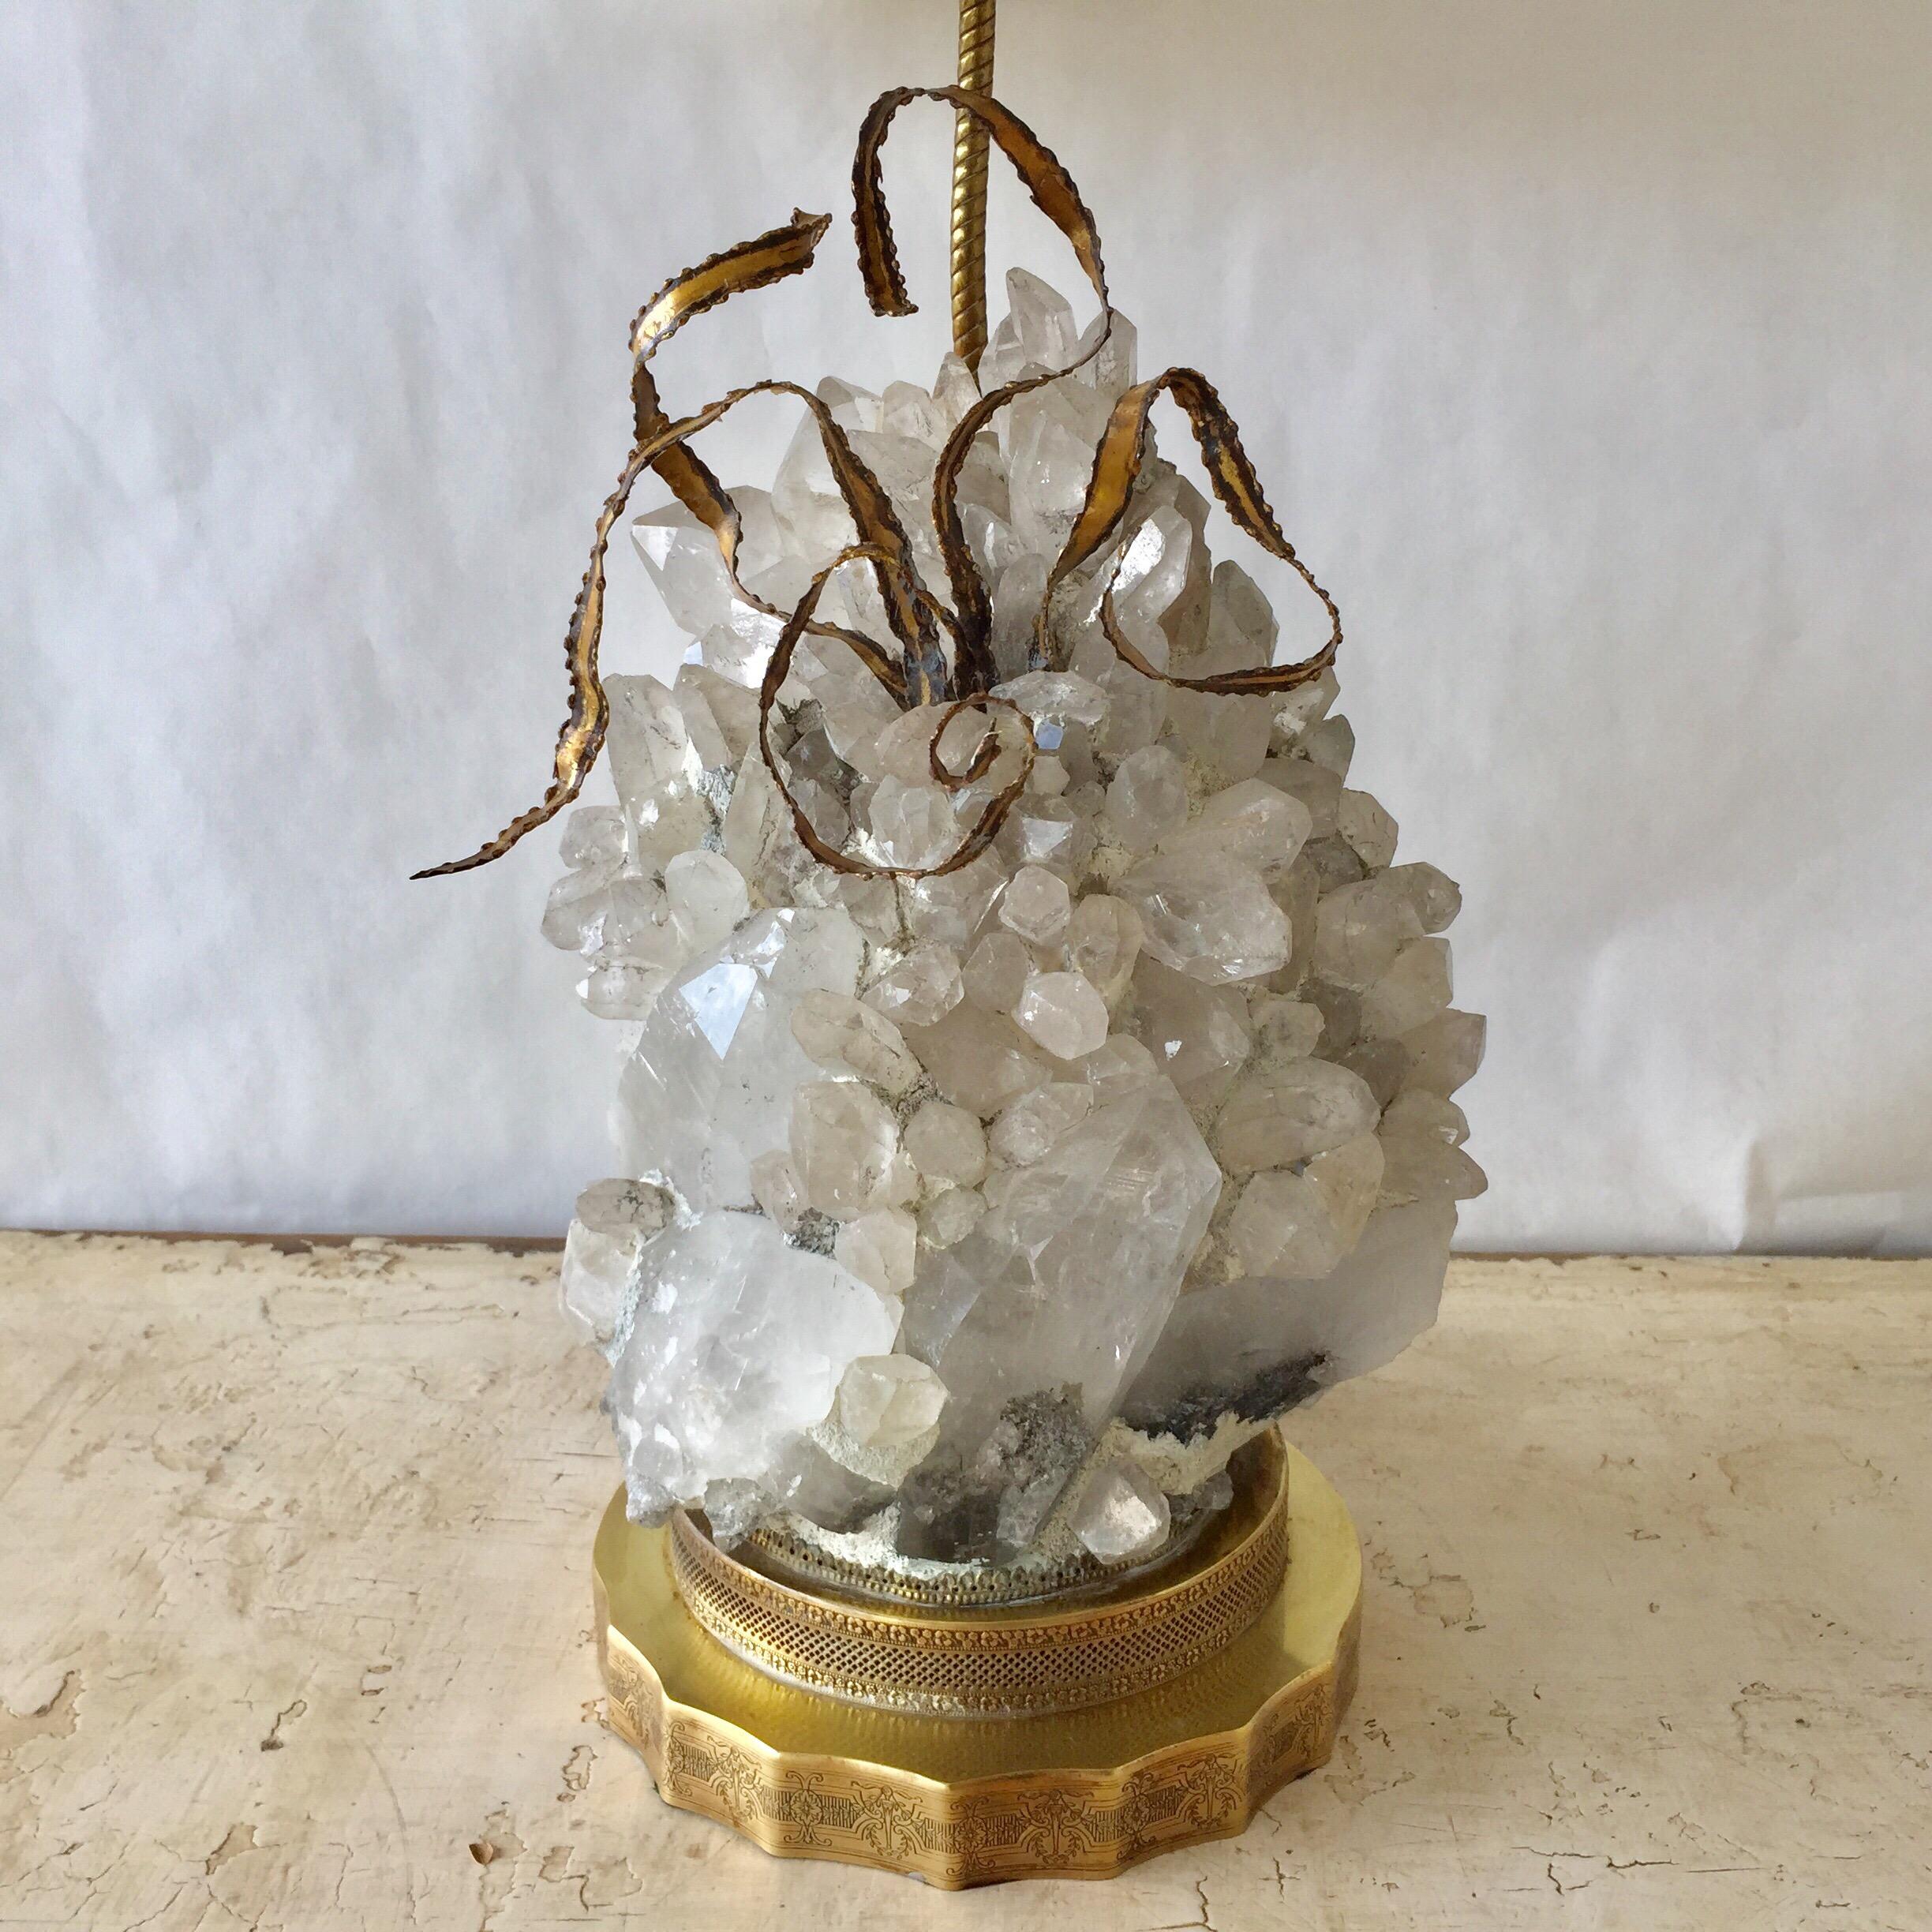 Arrangement of rock crystal quartz and brass plant elements on brass base which is intricately etched. This lamp is from the 1940s. All original and newly rewired. Never seen one like this before - very rare! 

Note: Quartz piece is 12 inches